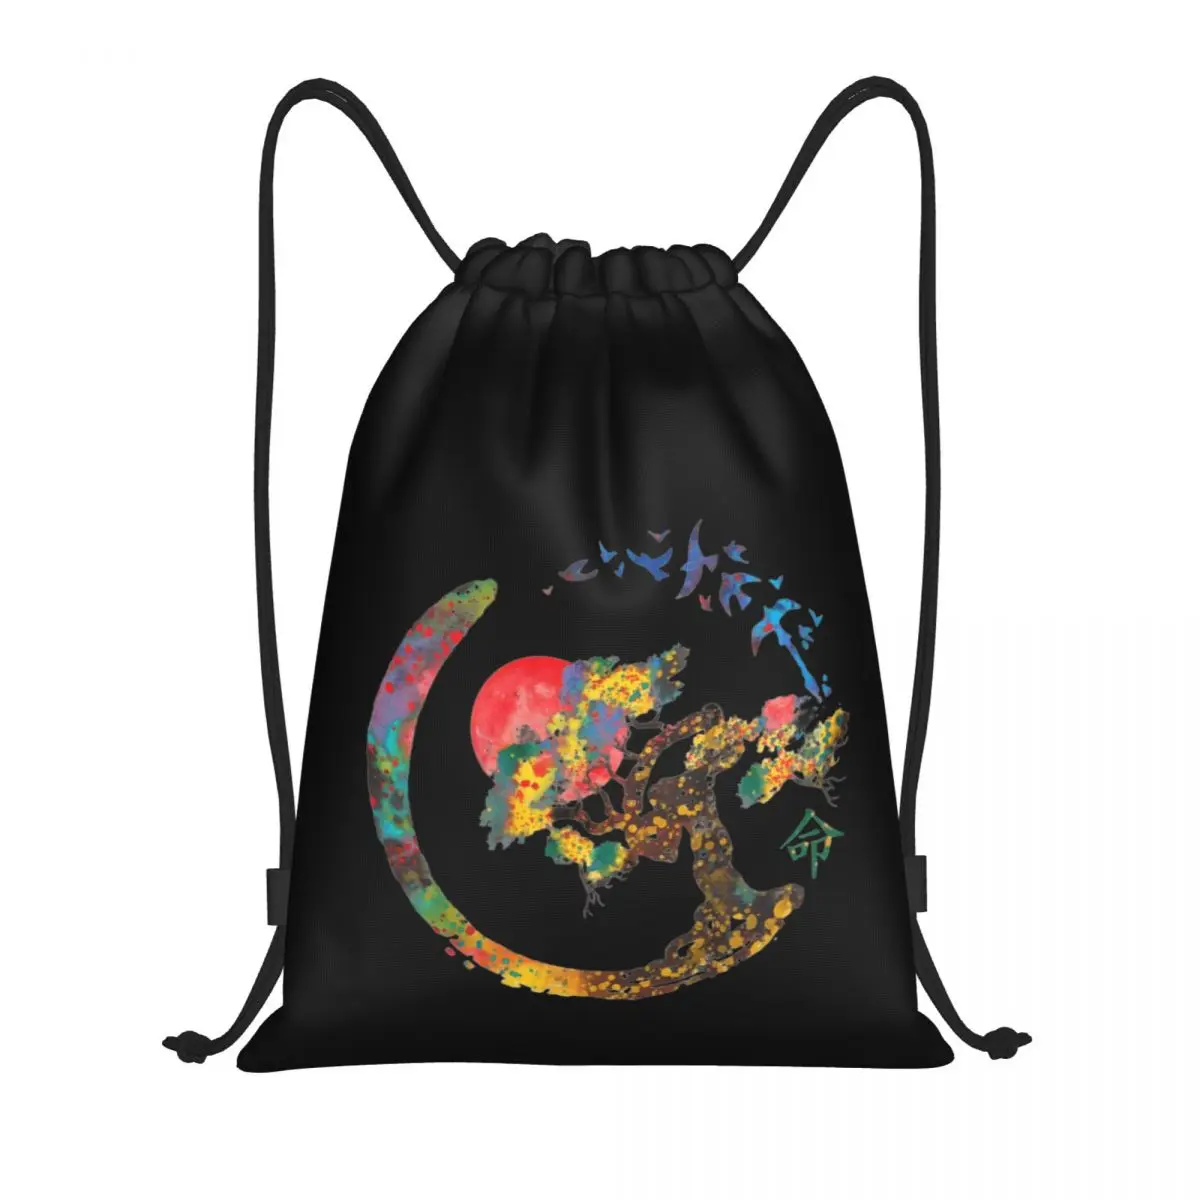 

Enso Circle And Bonsai 6 Drawstring Bags Gym Bag Funny Graphic Backpack Geek Field pack Secure retro